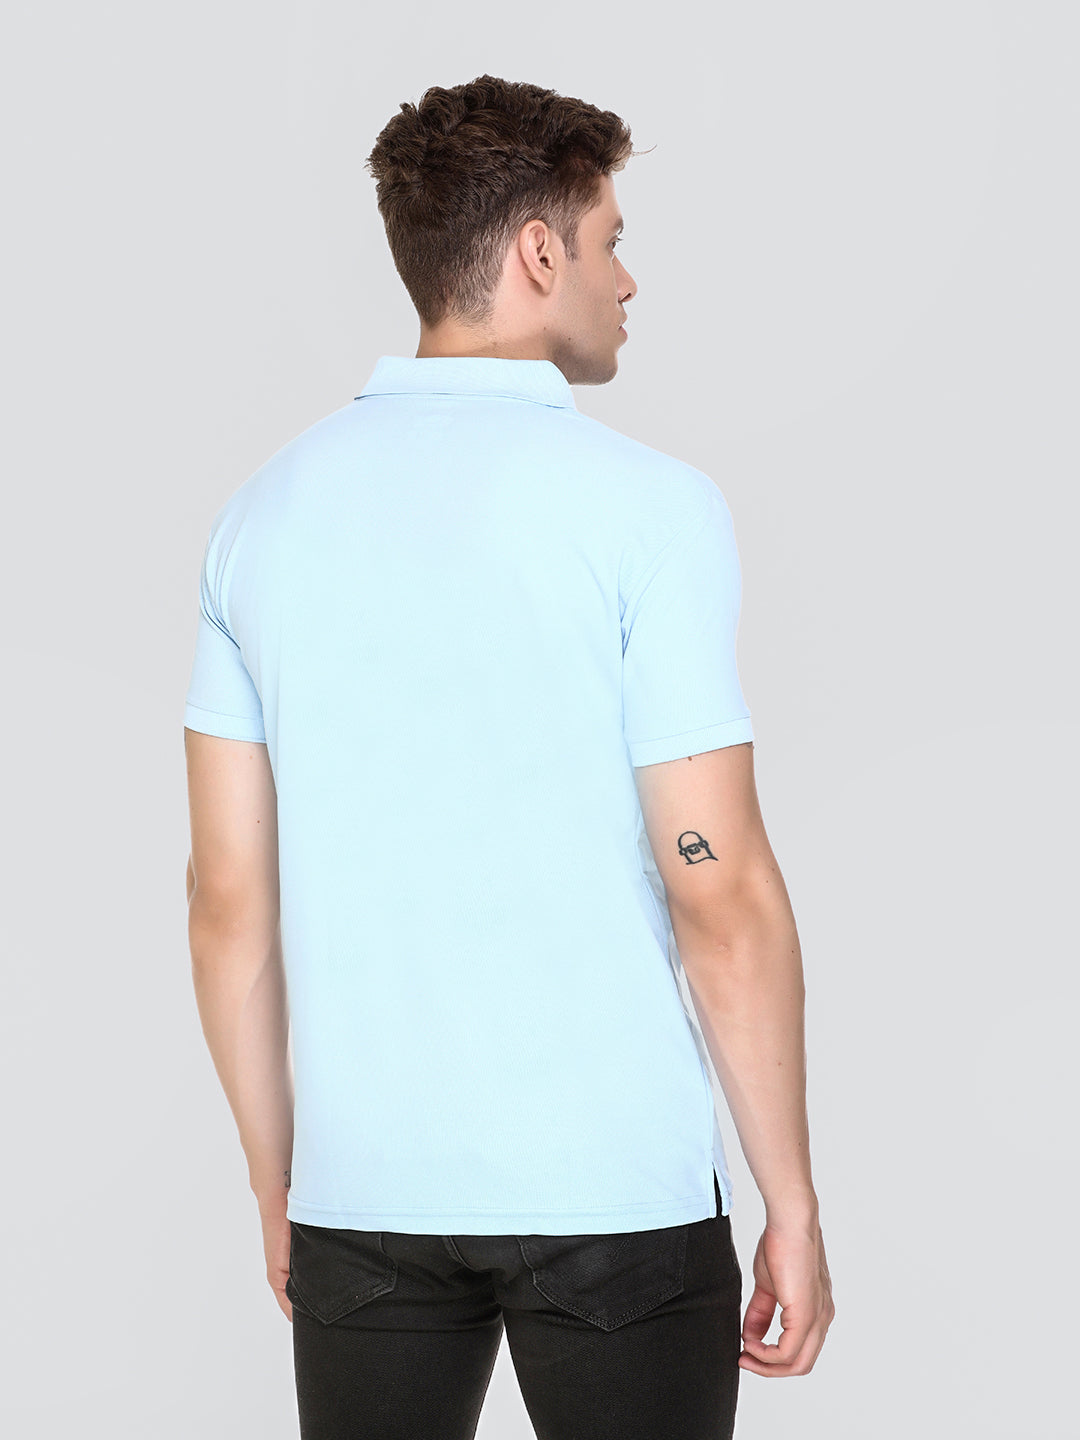 Comfortable Jinxer Blue Polo Neck T Shirt for men online in India